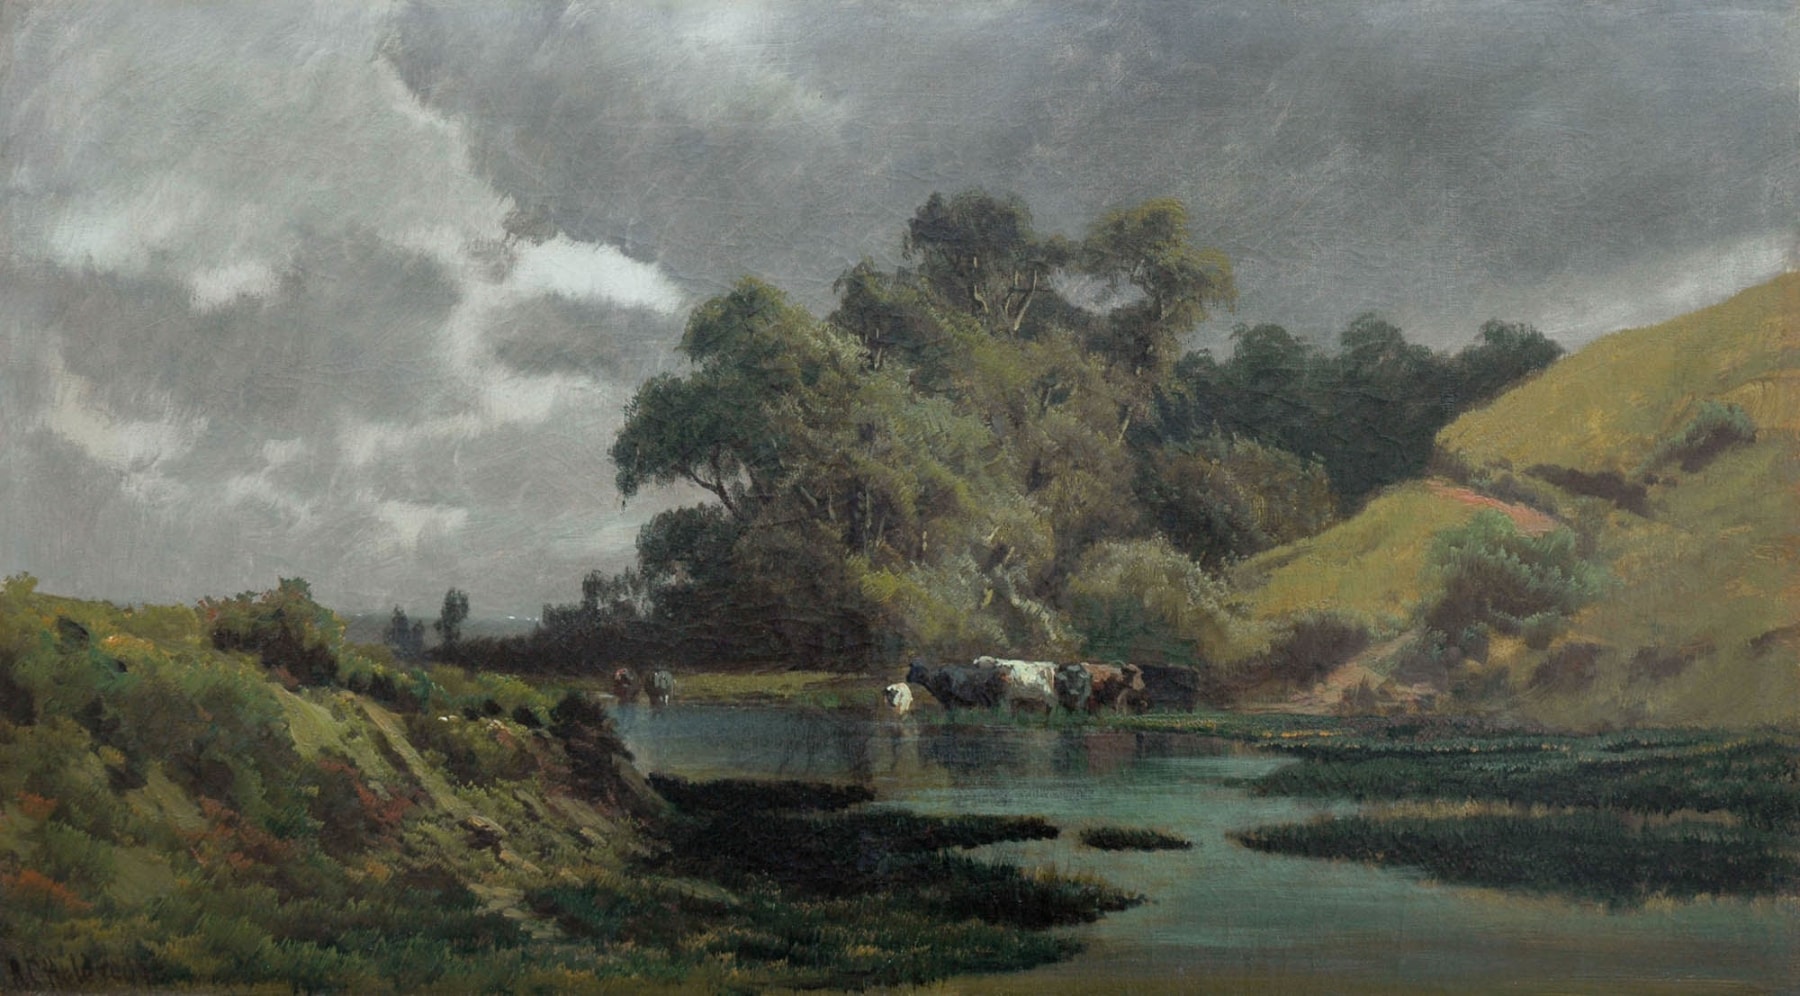 Ransome Holdredge, Landscape with Cows, 1885